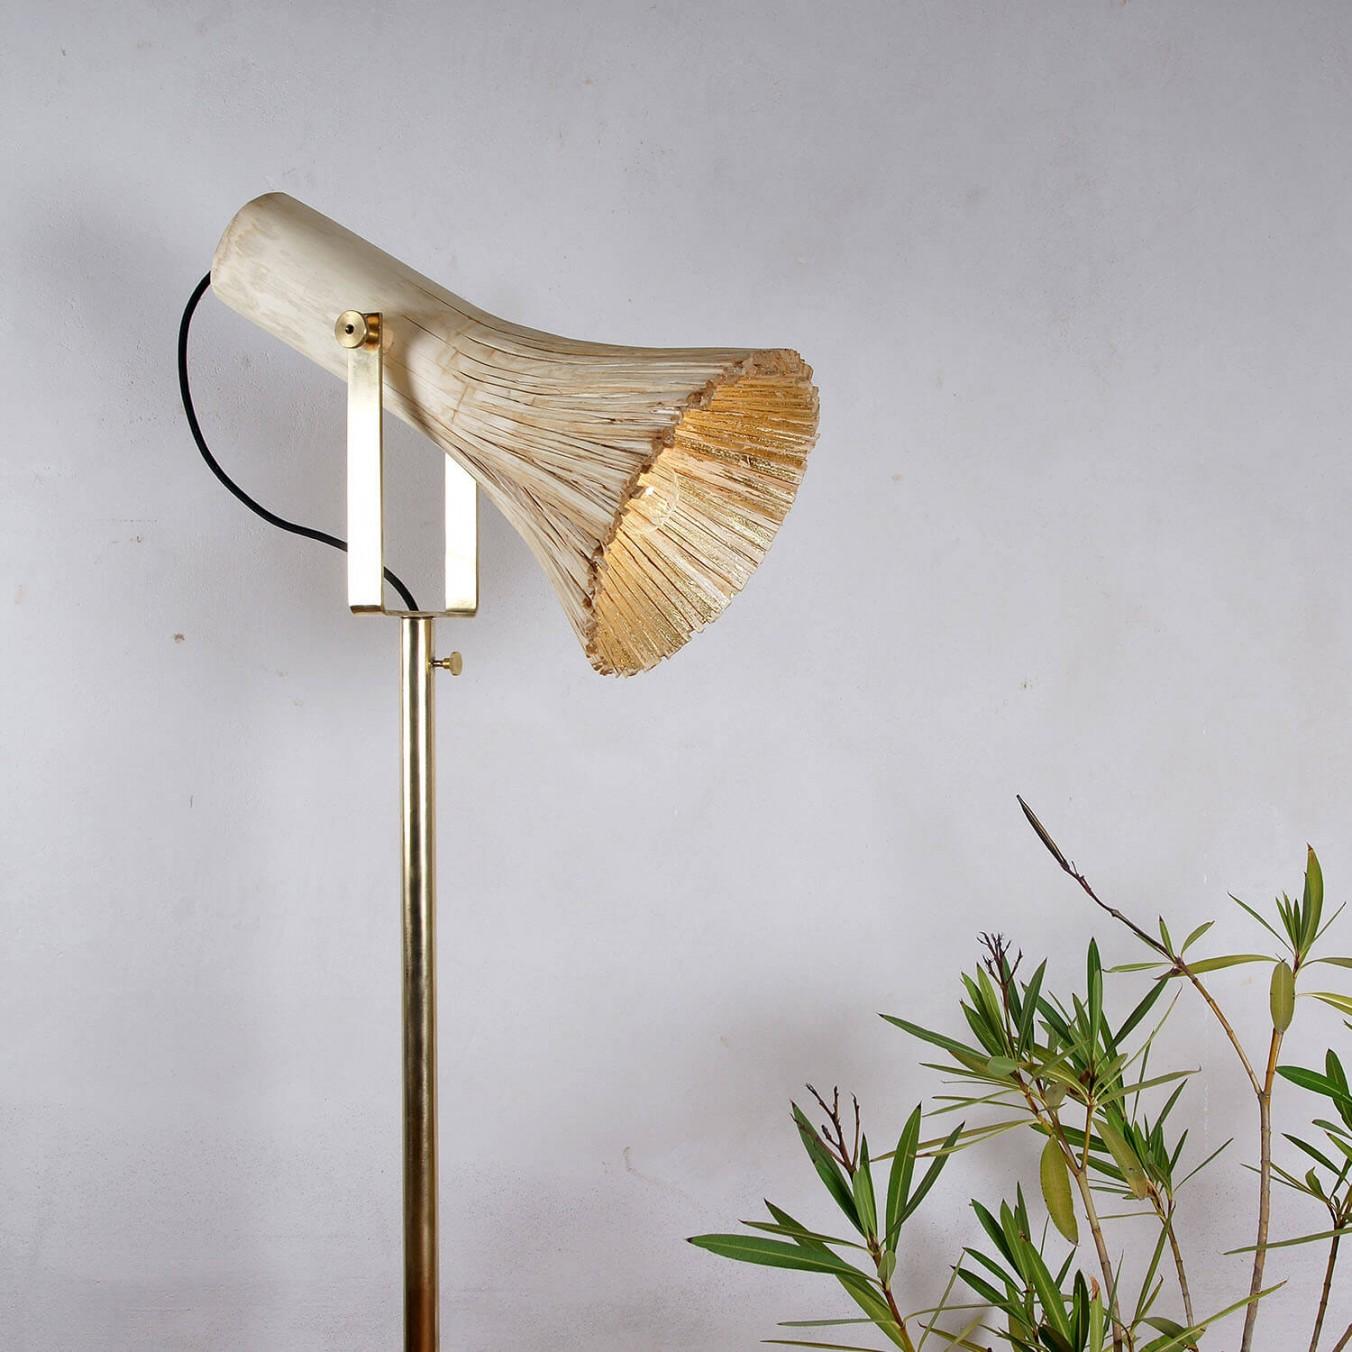 Contemporary Black Floor Lamp, Pressed Wood Light by Johannes Hemann In New Condition For Sale In Warsaw, PL